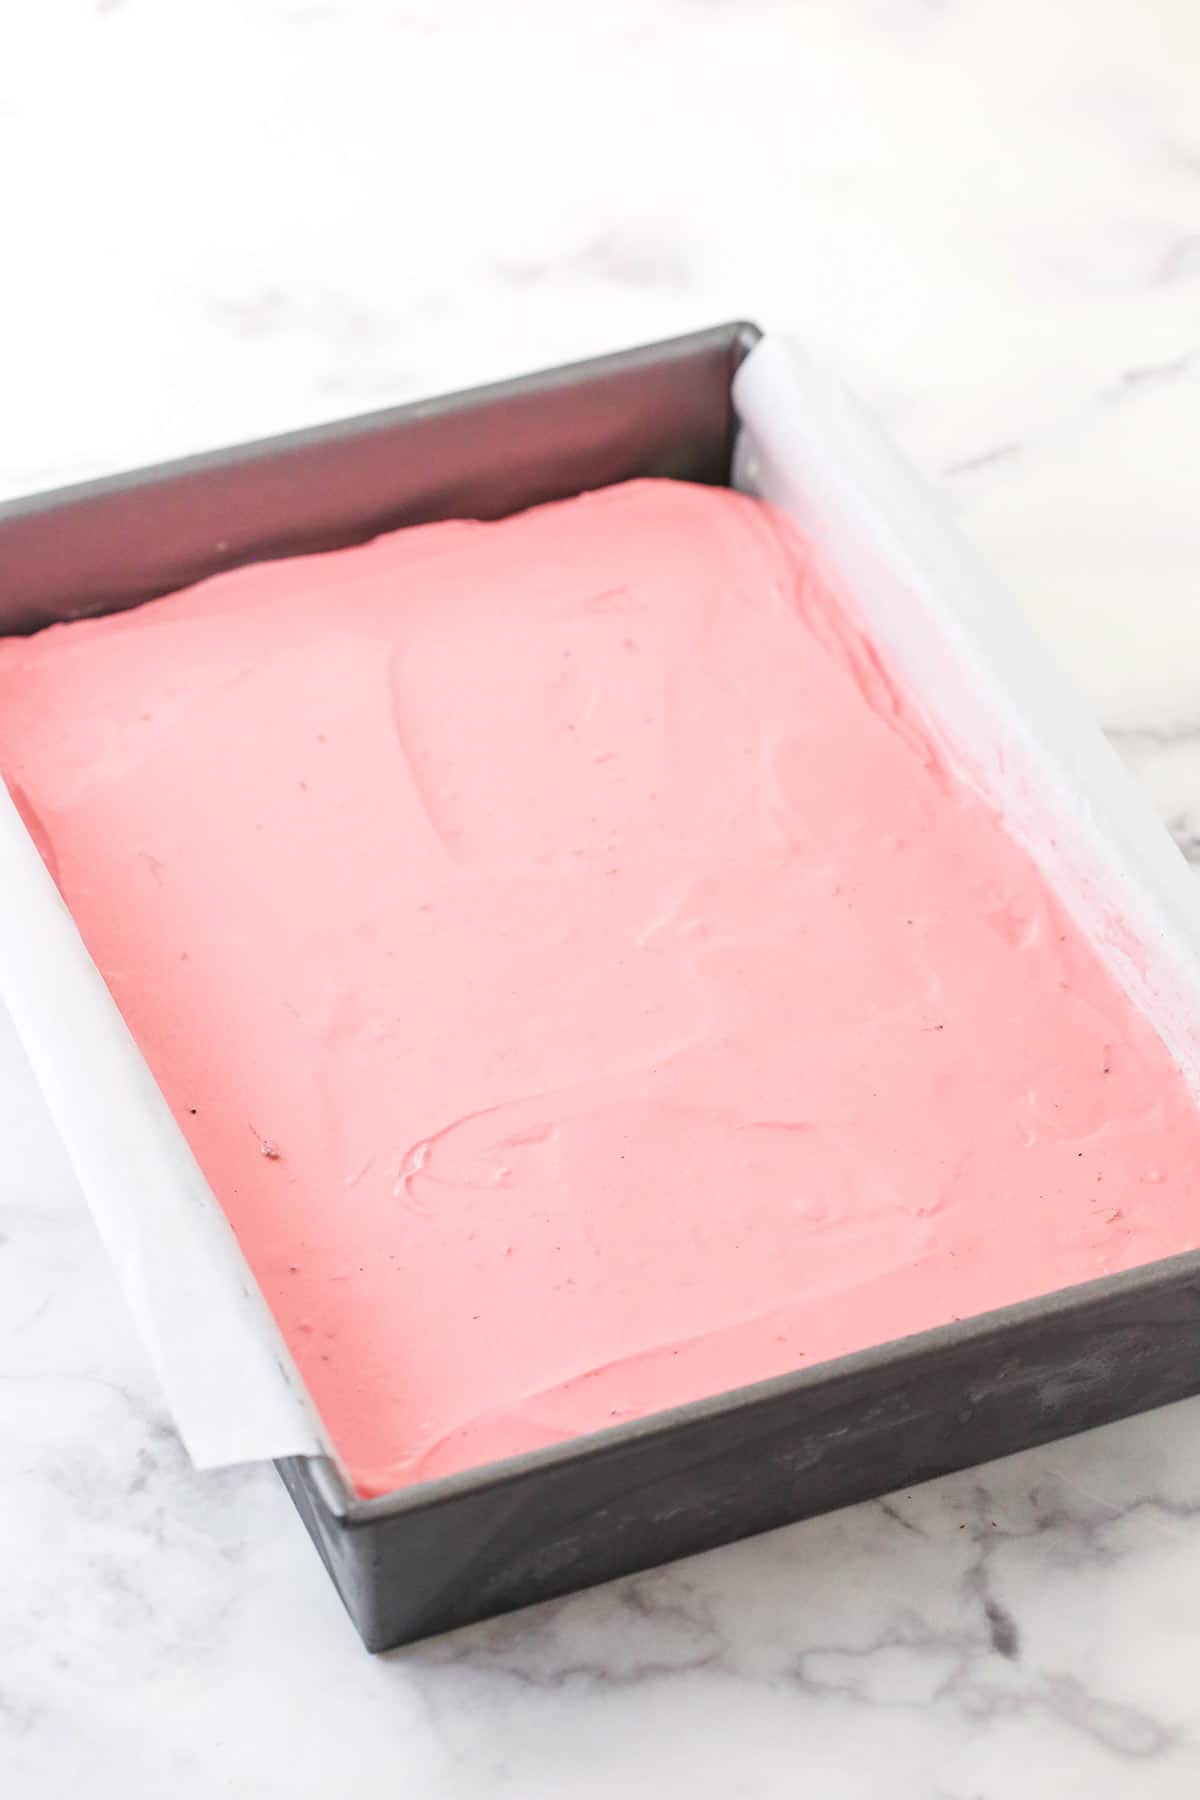 The strawberry ice cream layer on top of the vanilla ice cream layer on top of the bottom cookie base in a pan